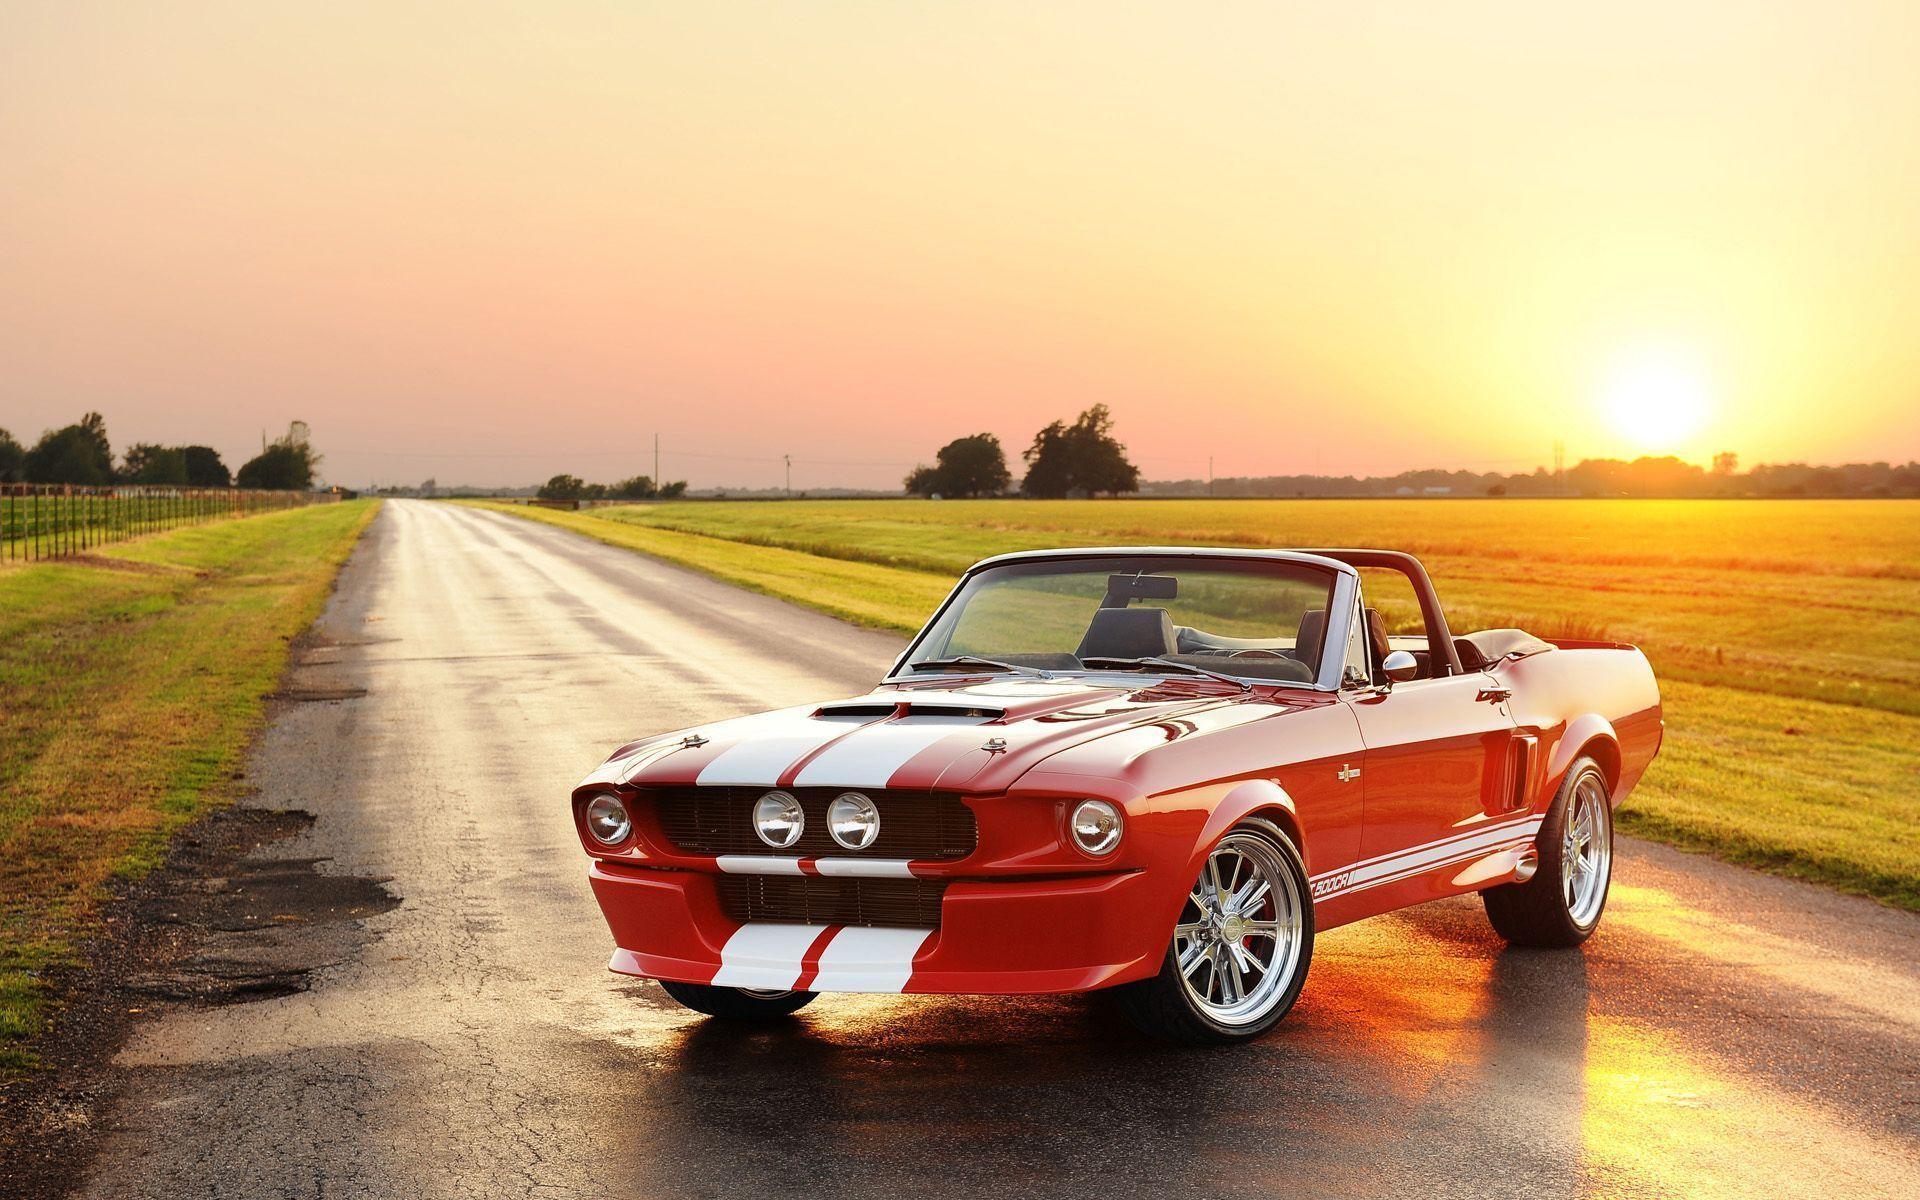 Mustang Shelby 33603 High Definition Wallpaper. Suwall